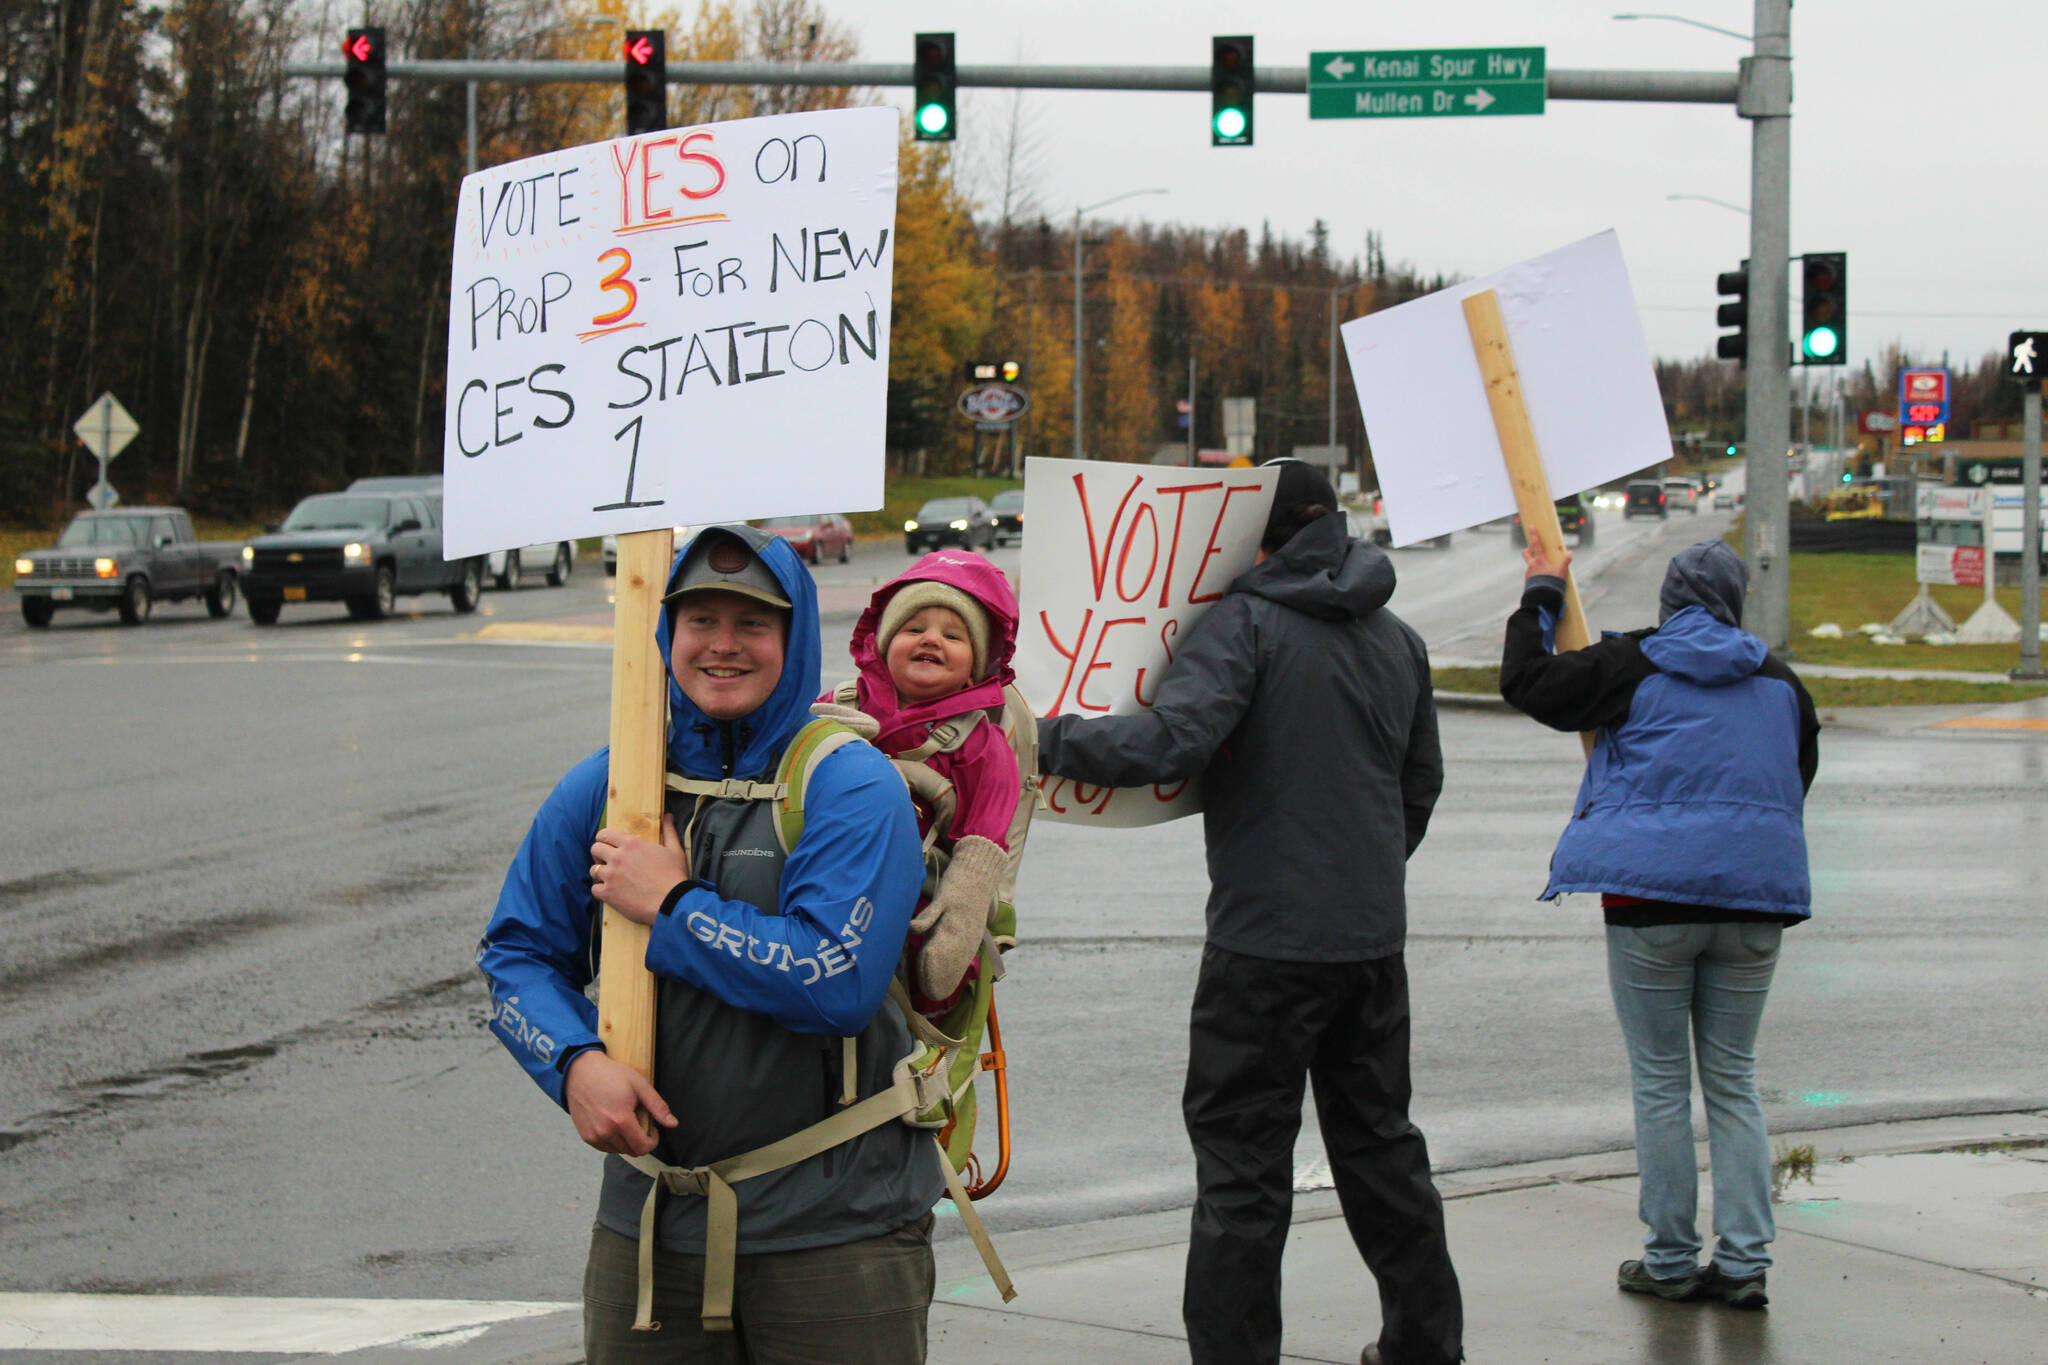 Spencer McLean and his daughter, Emma McLean, show their support for Proposition 3, through which a new CES Station 1 would be constructed in Soldotna, on Tuesday, Oct. 4, 2022, in Soldotna, Alaska. (Ashlyn O’Hara/Peninsula Clarion)